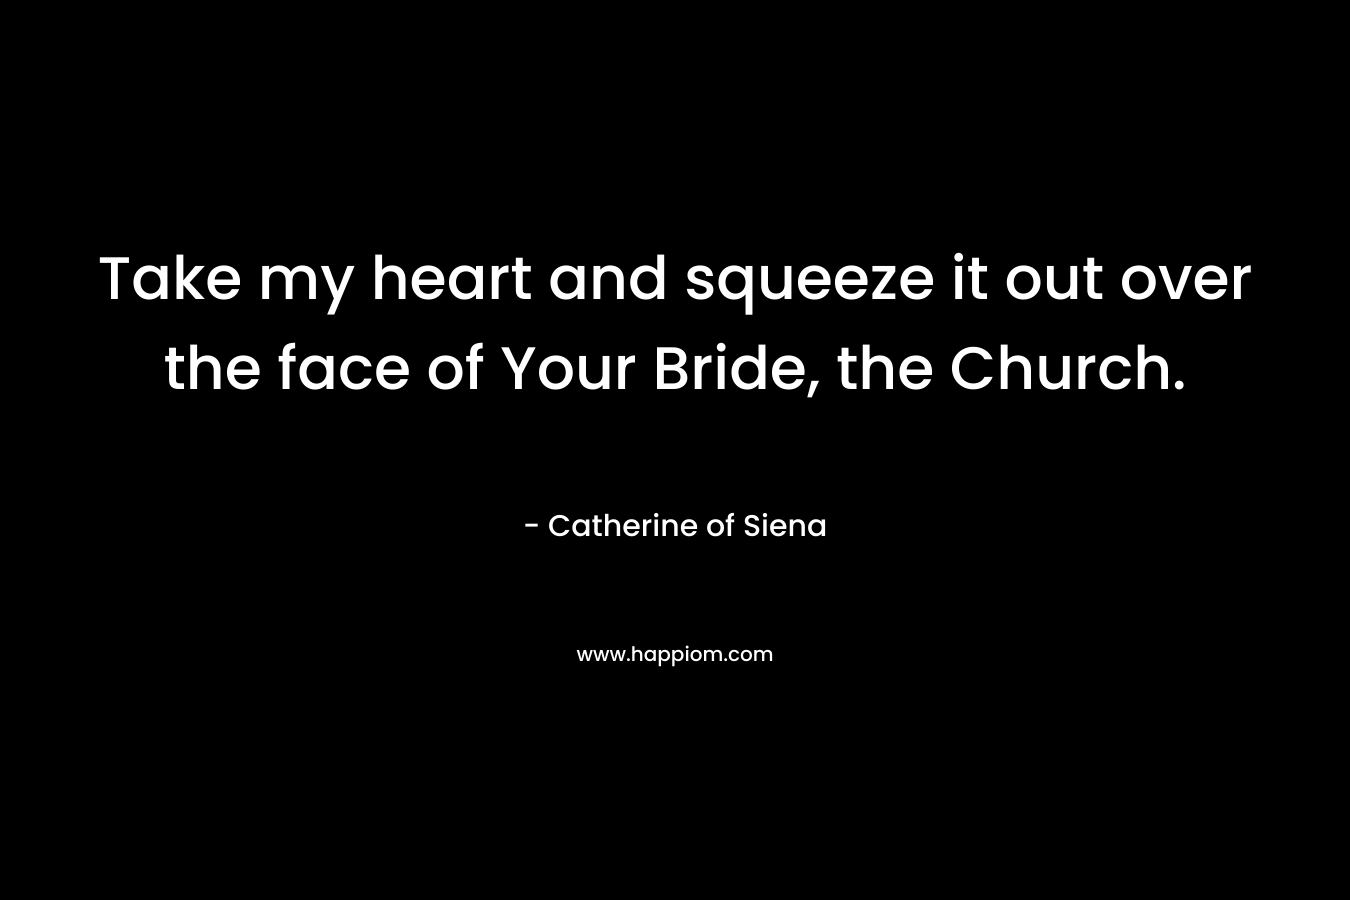 Take my heart and squeeze it out over the face of Your Bride, the Church. – Catherine of Siena